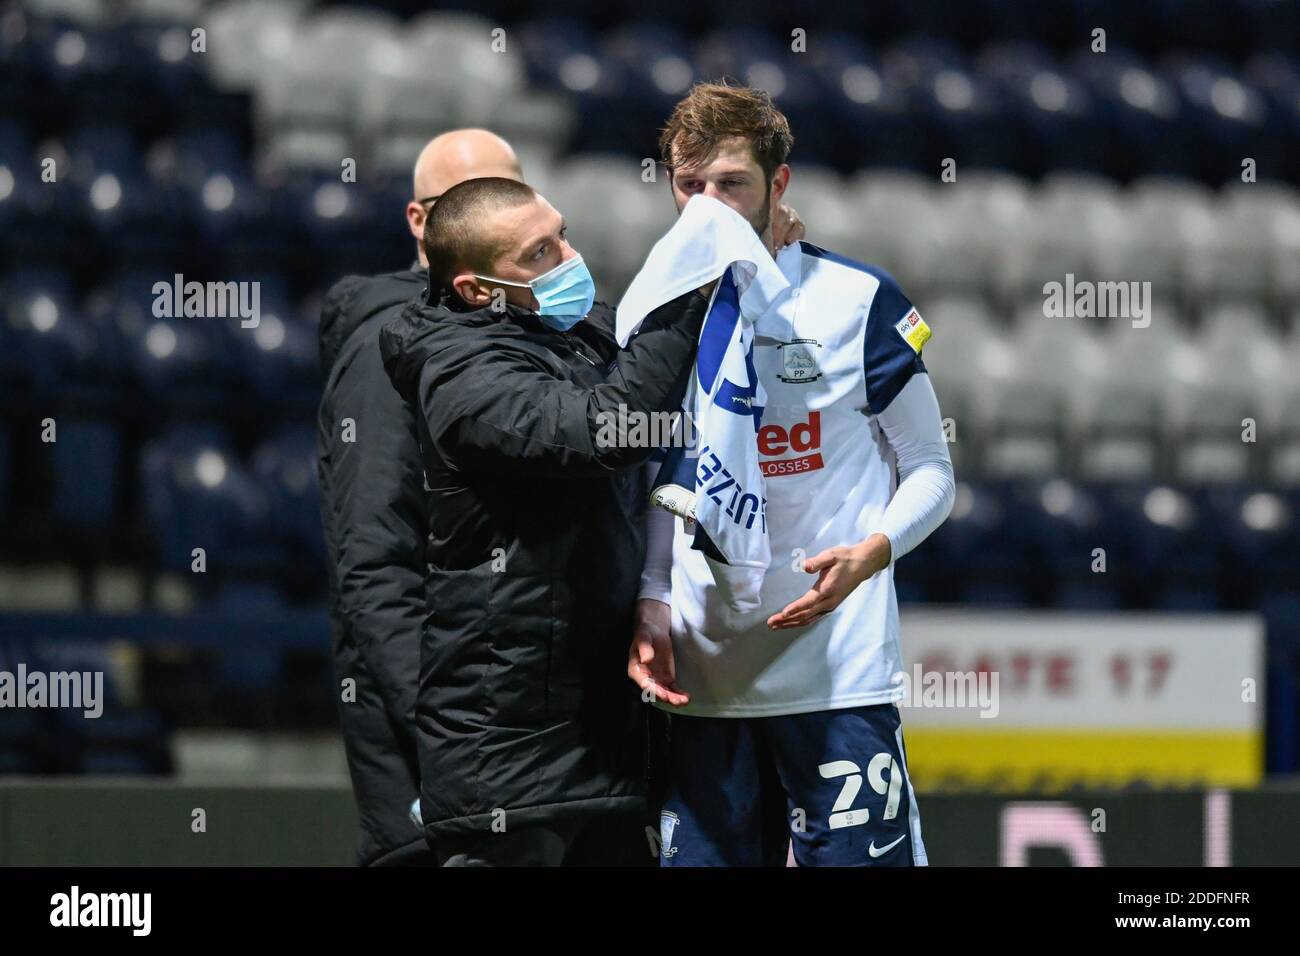 Tom Barkhuizen #29 of Preston North End continues to receive treatment on the side of the pitch after an injury Stock Photo